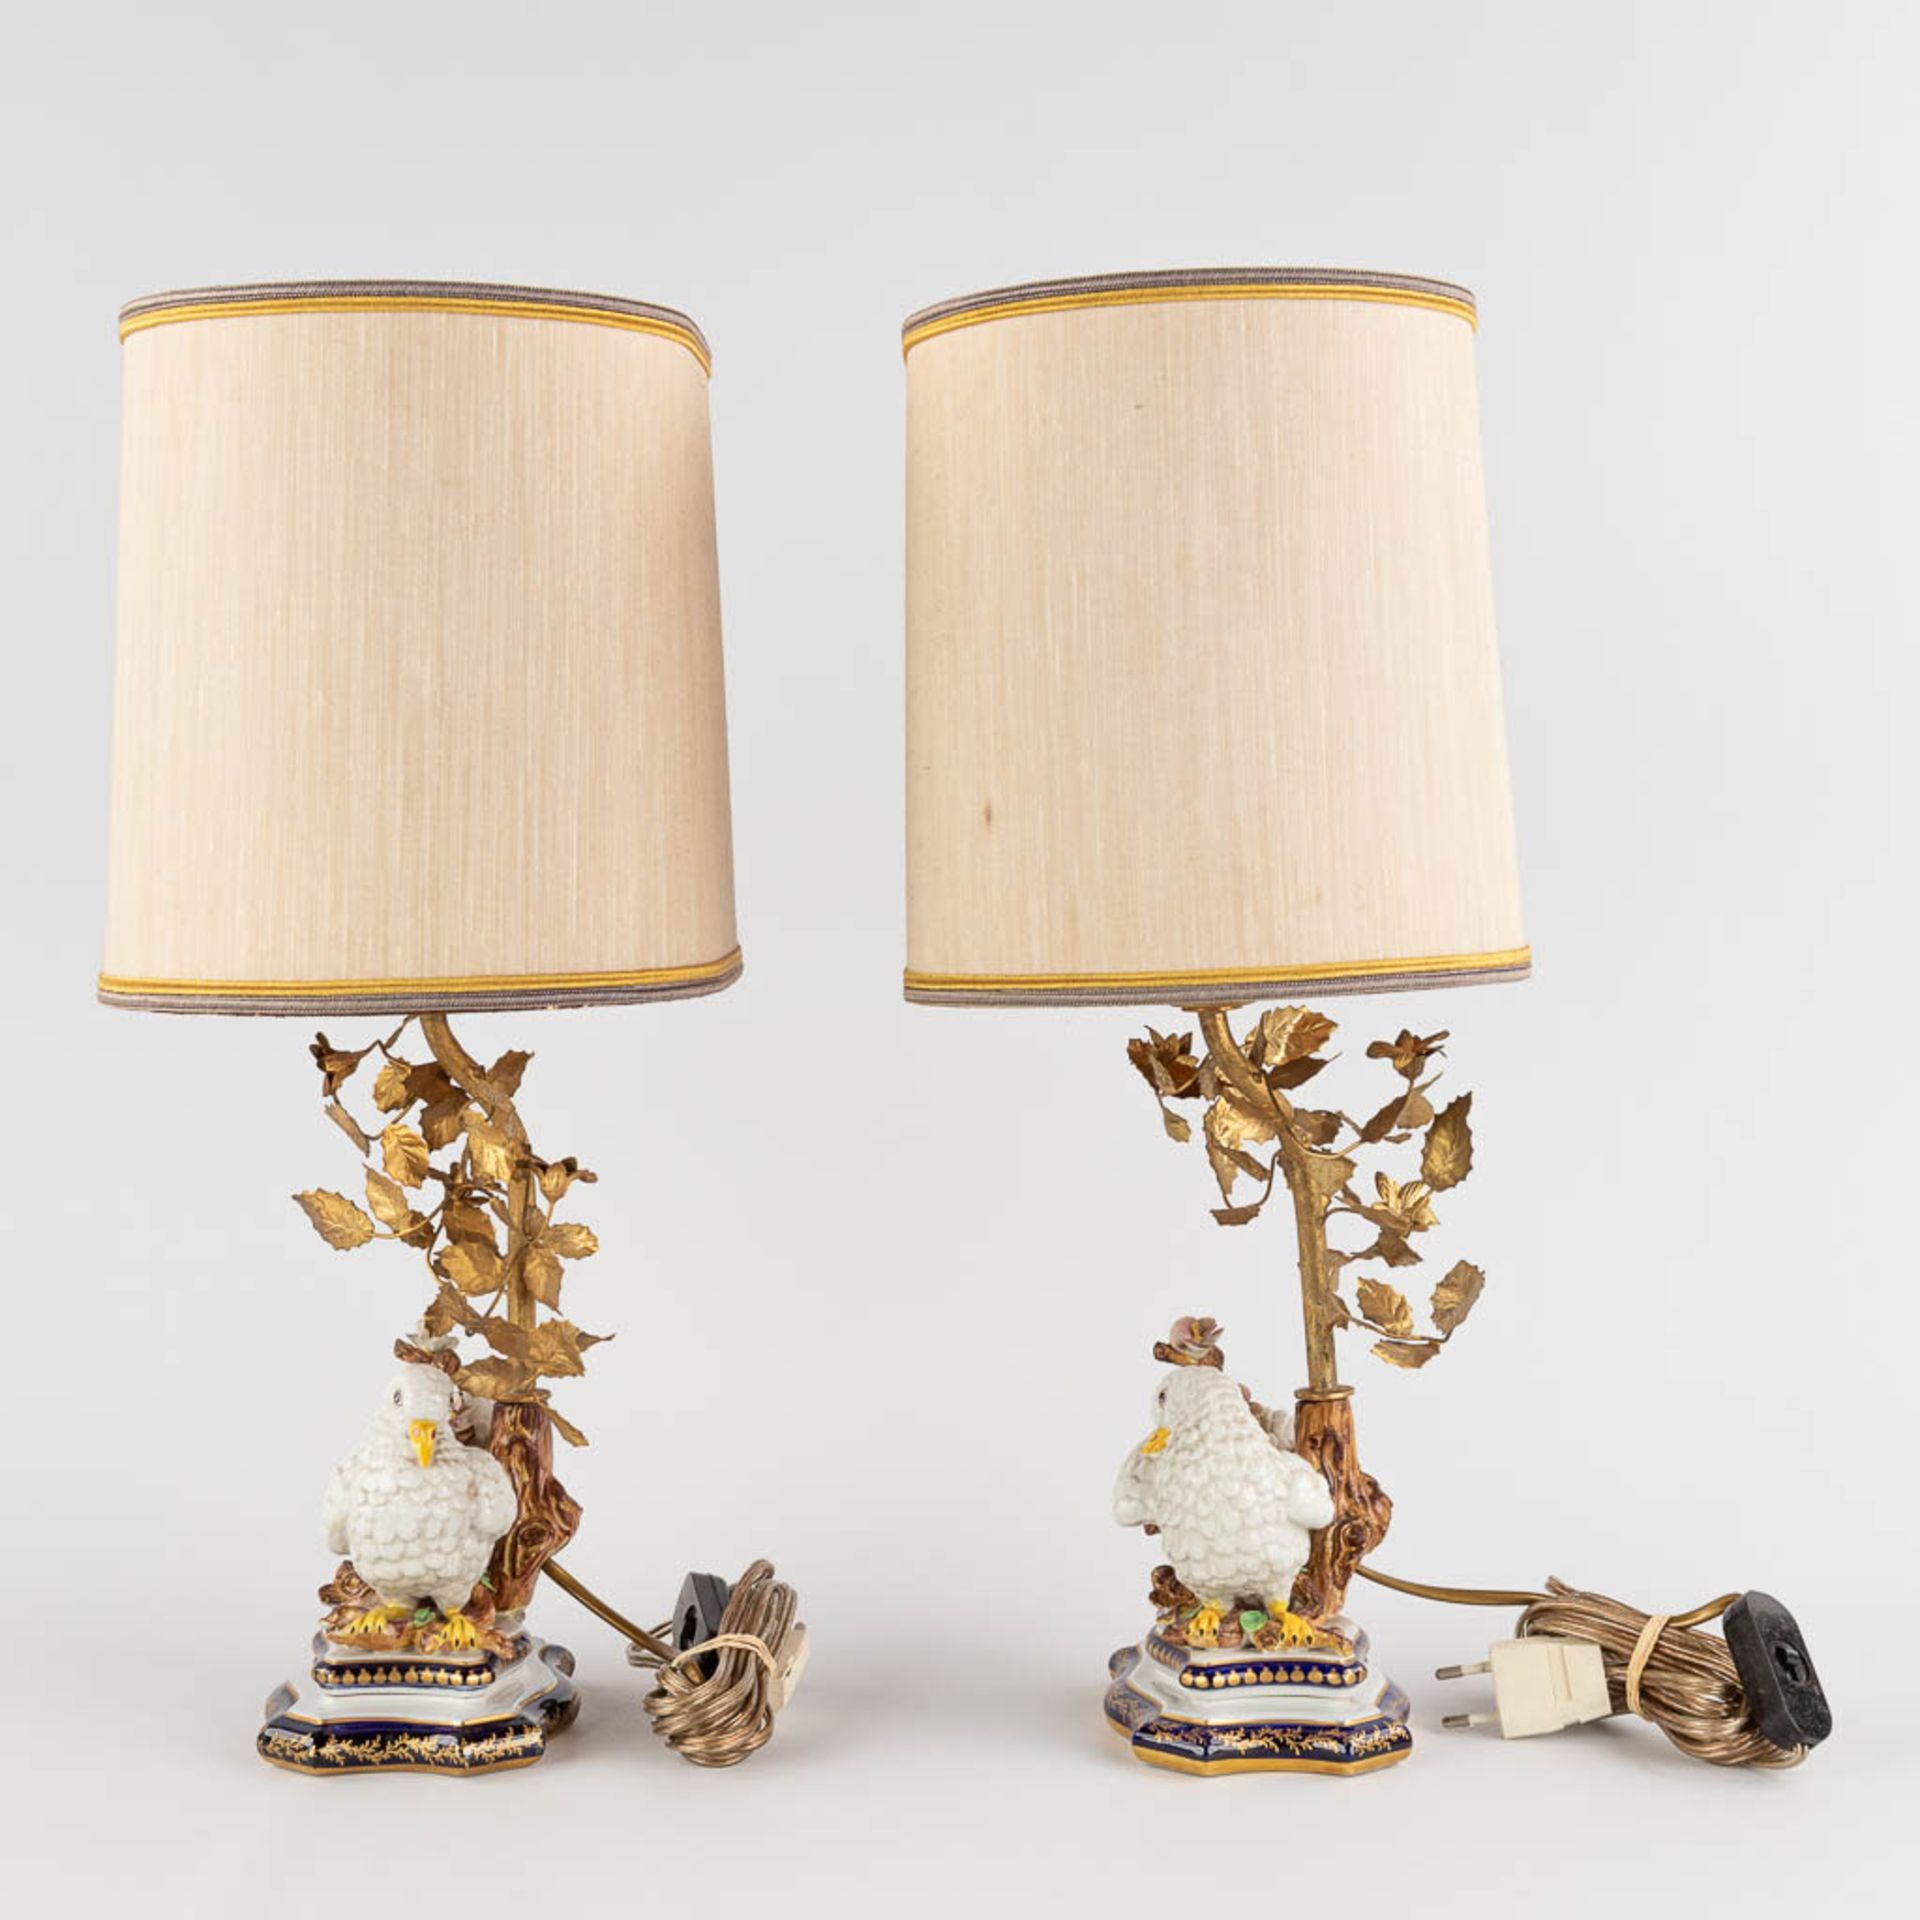 A pair of porcelain and metal table lamps decorated with birds, Sèvres marks. 20th C. (D:12 x W:15 x - Bild 3 aus 11